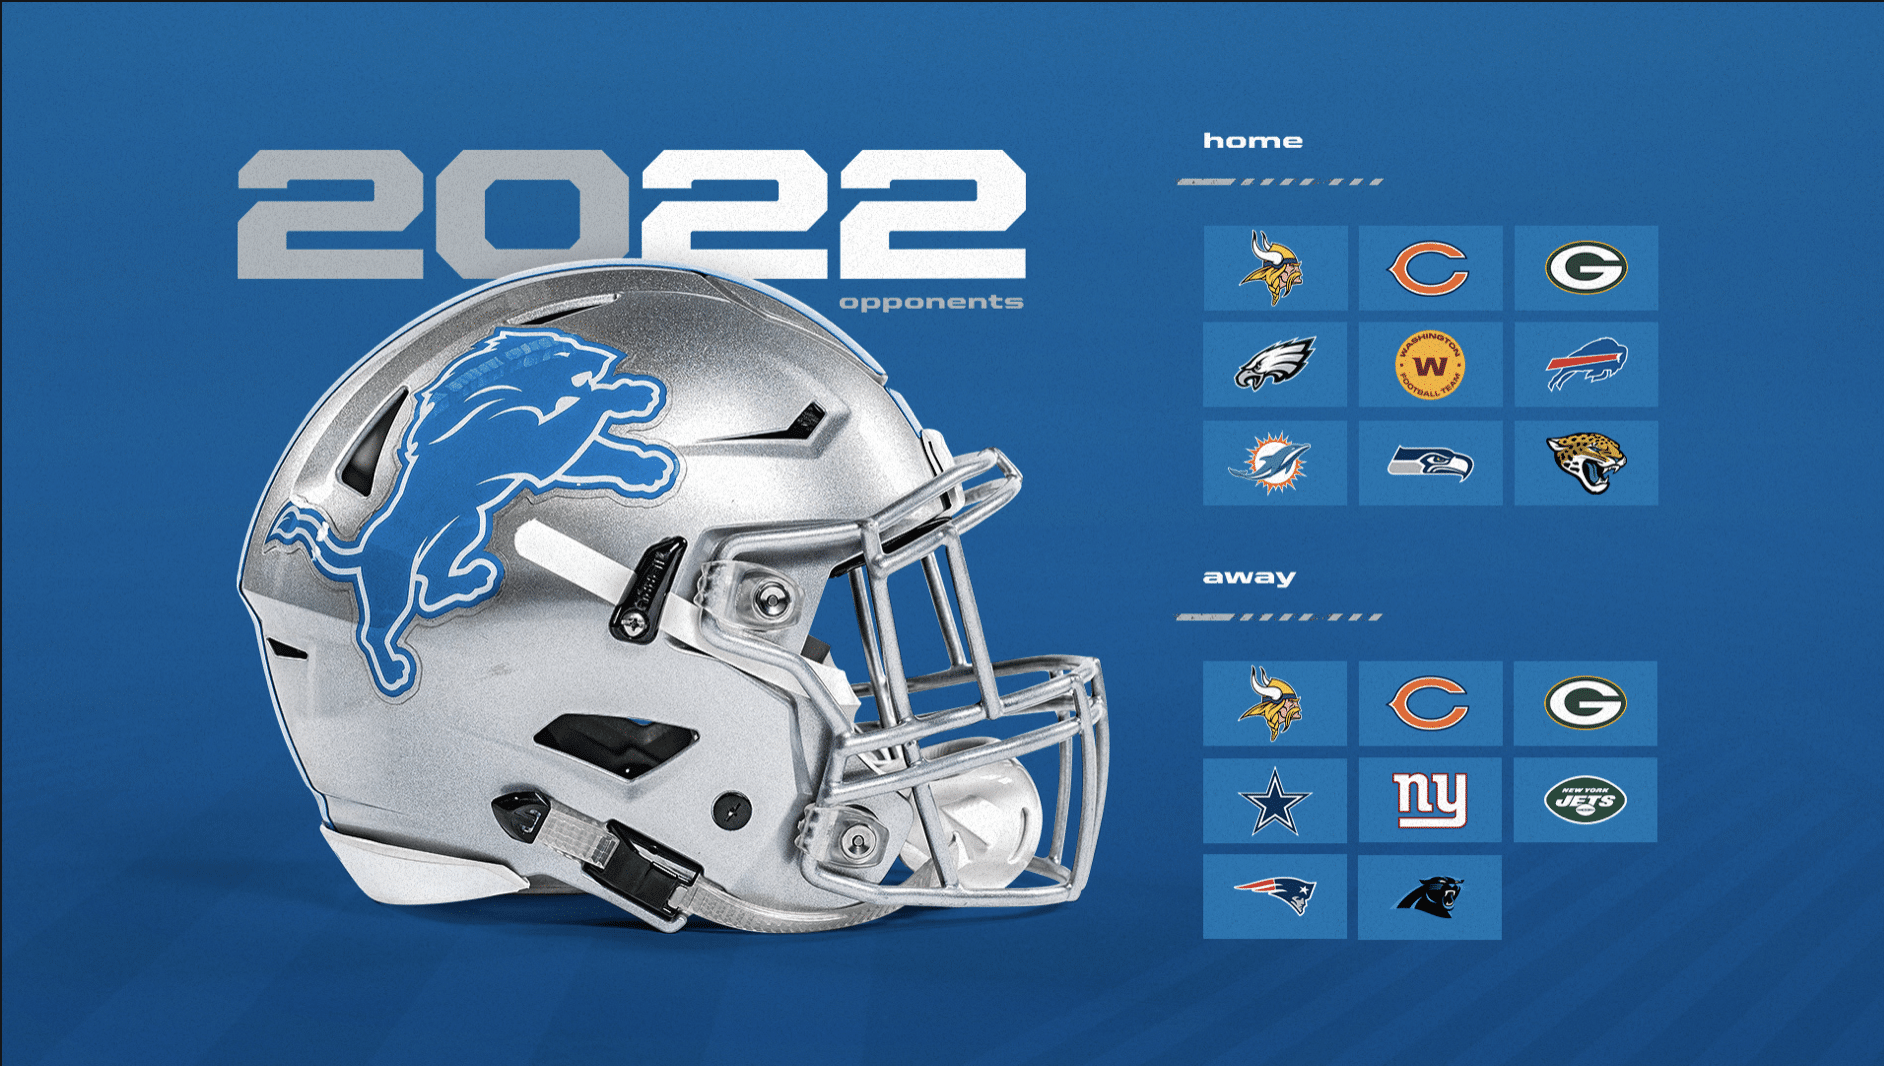 Detroit Lions 2022 Home/Away opponents revealed - Detroit Sports Nation